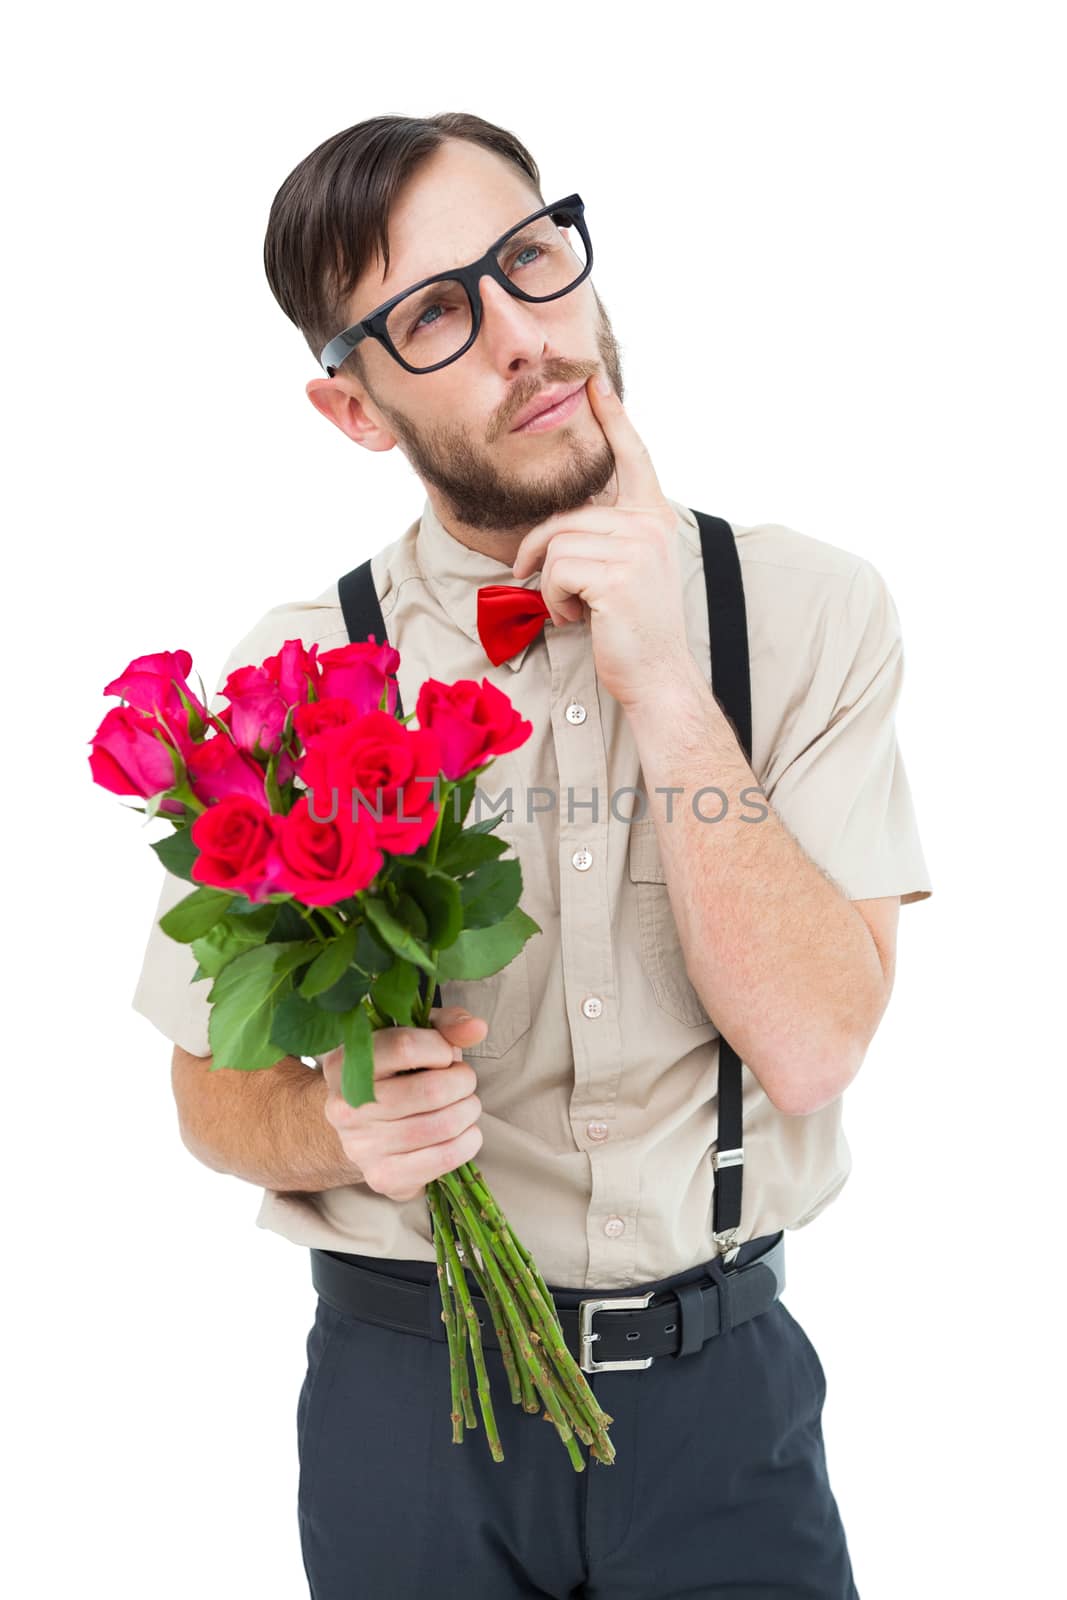 Geeky hipster offering bunch of roses by Wavebreakmedia